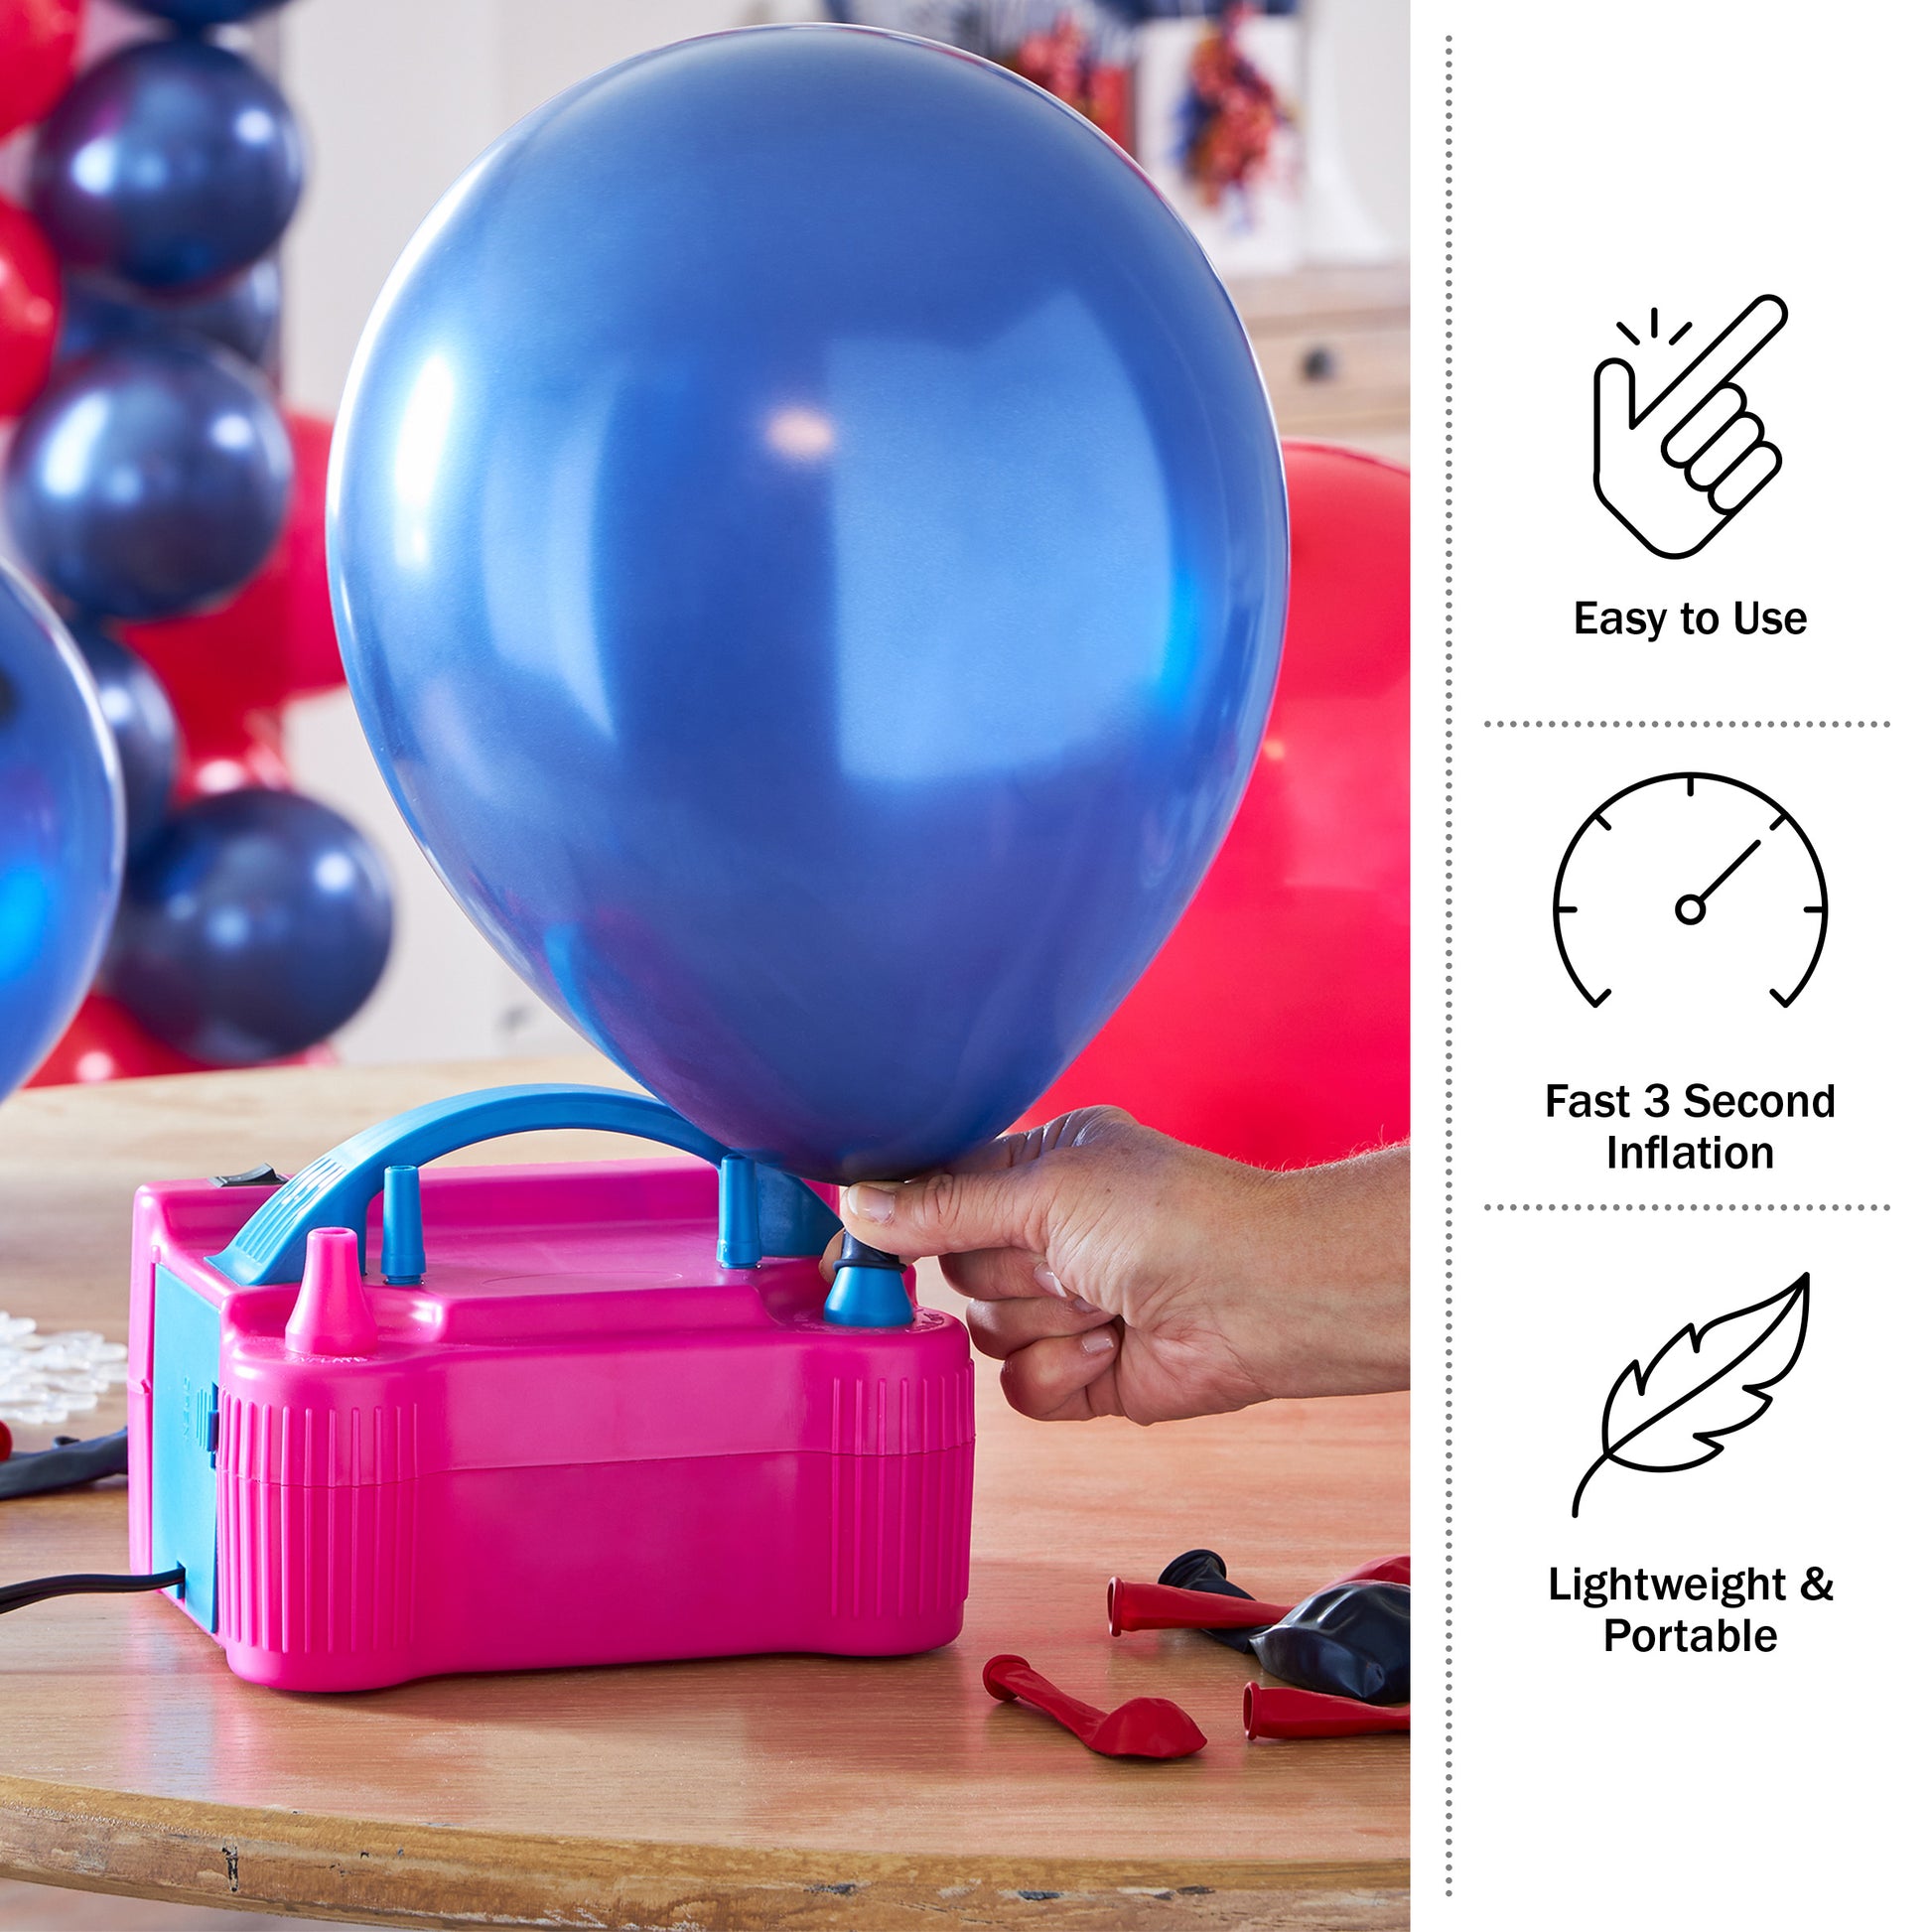 Cool Air Balloon Inflator - Blow up balloons quickly and easily!